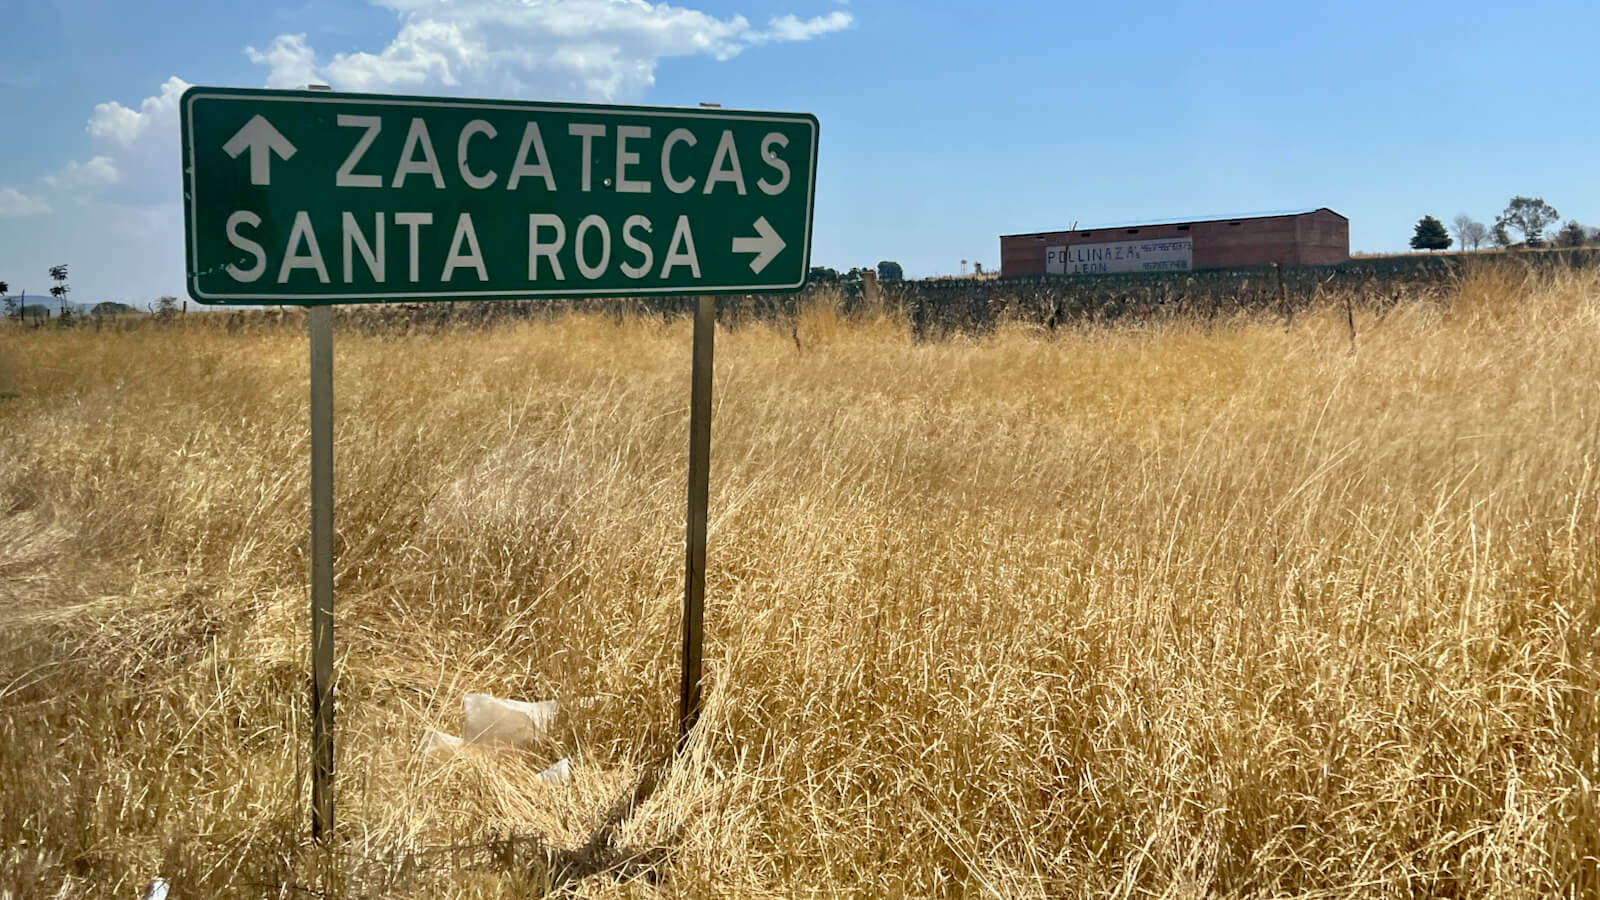 Road sign which points to Zacatecas straight ahead and Santa Rosa to the right